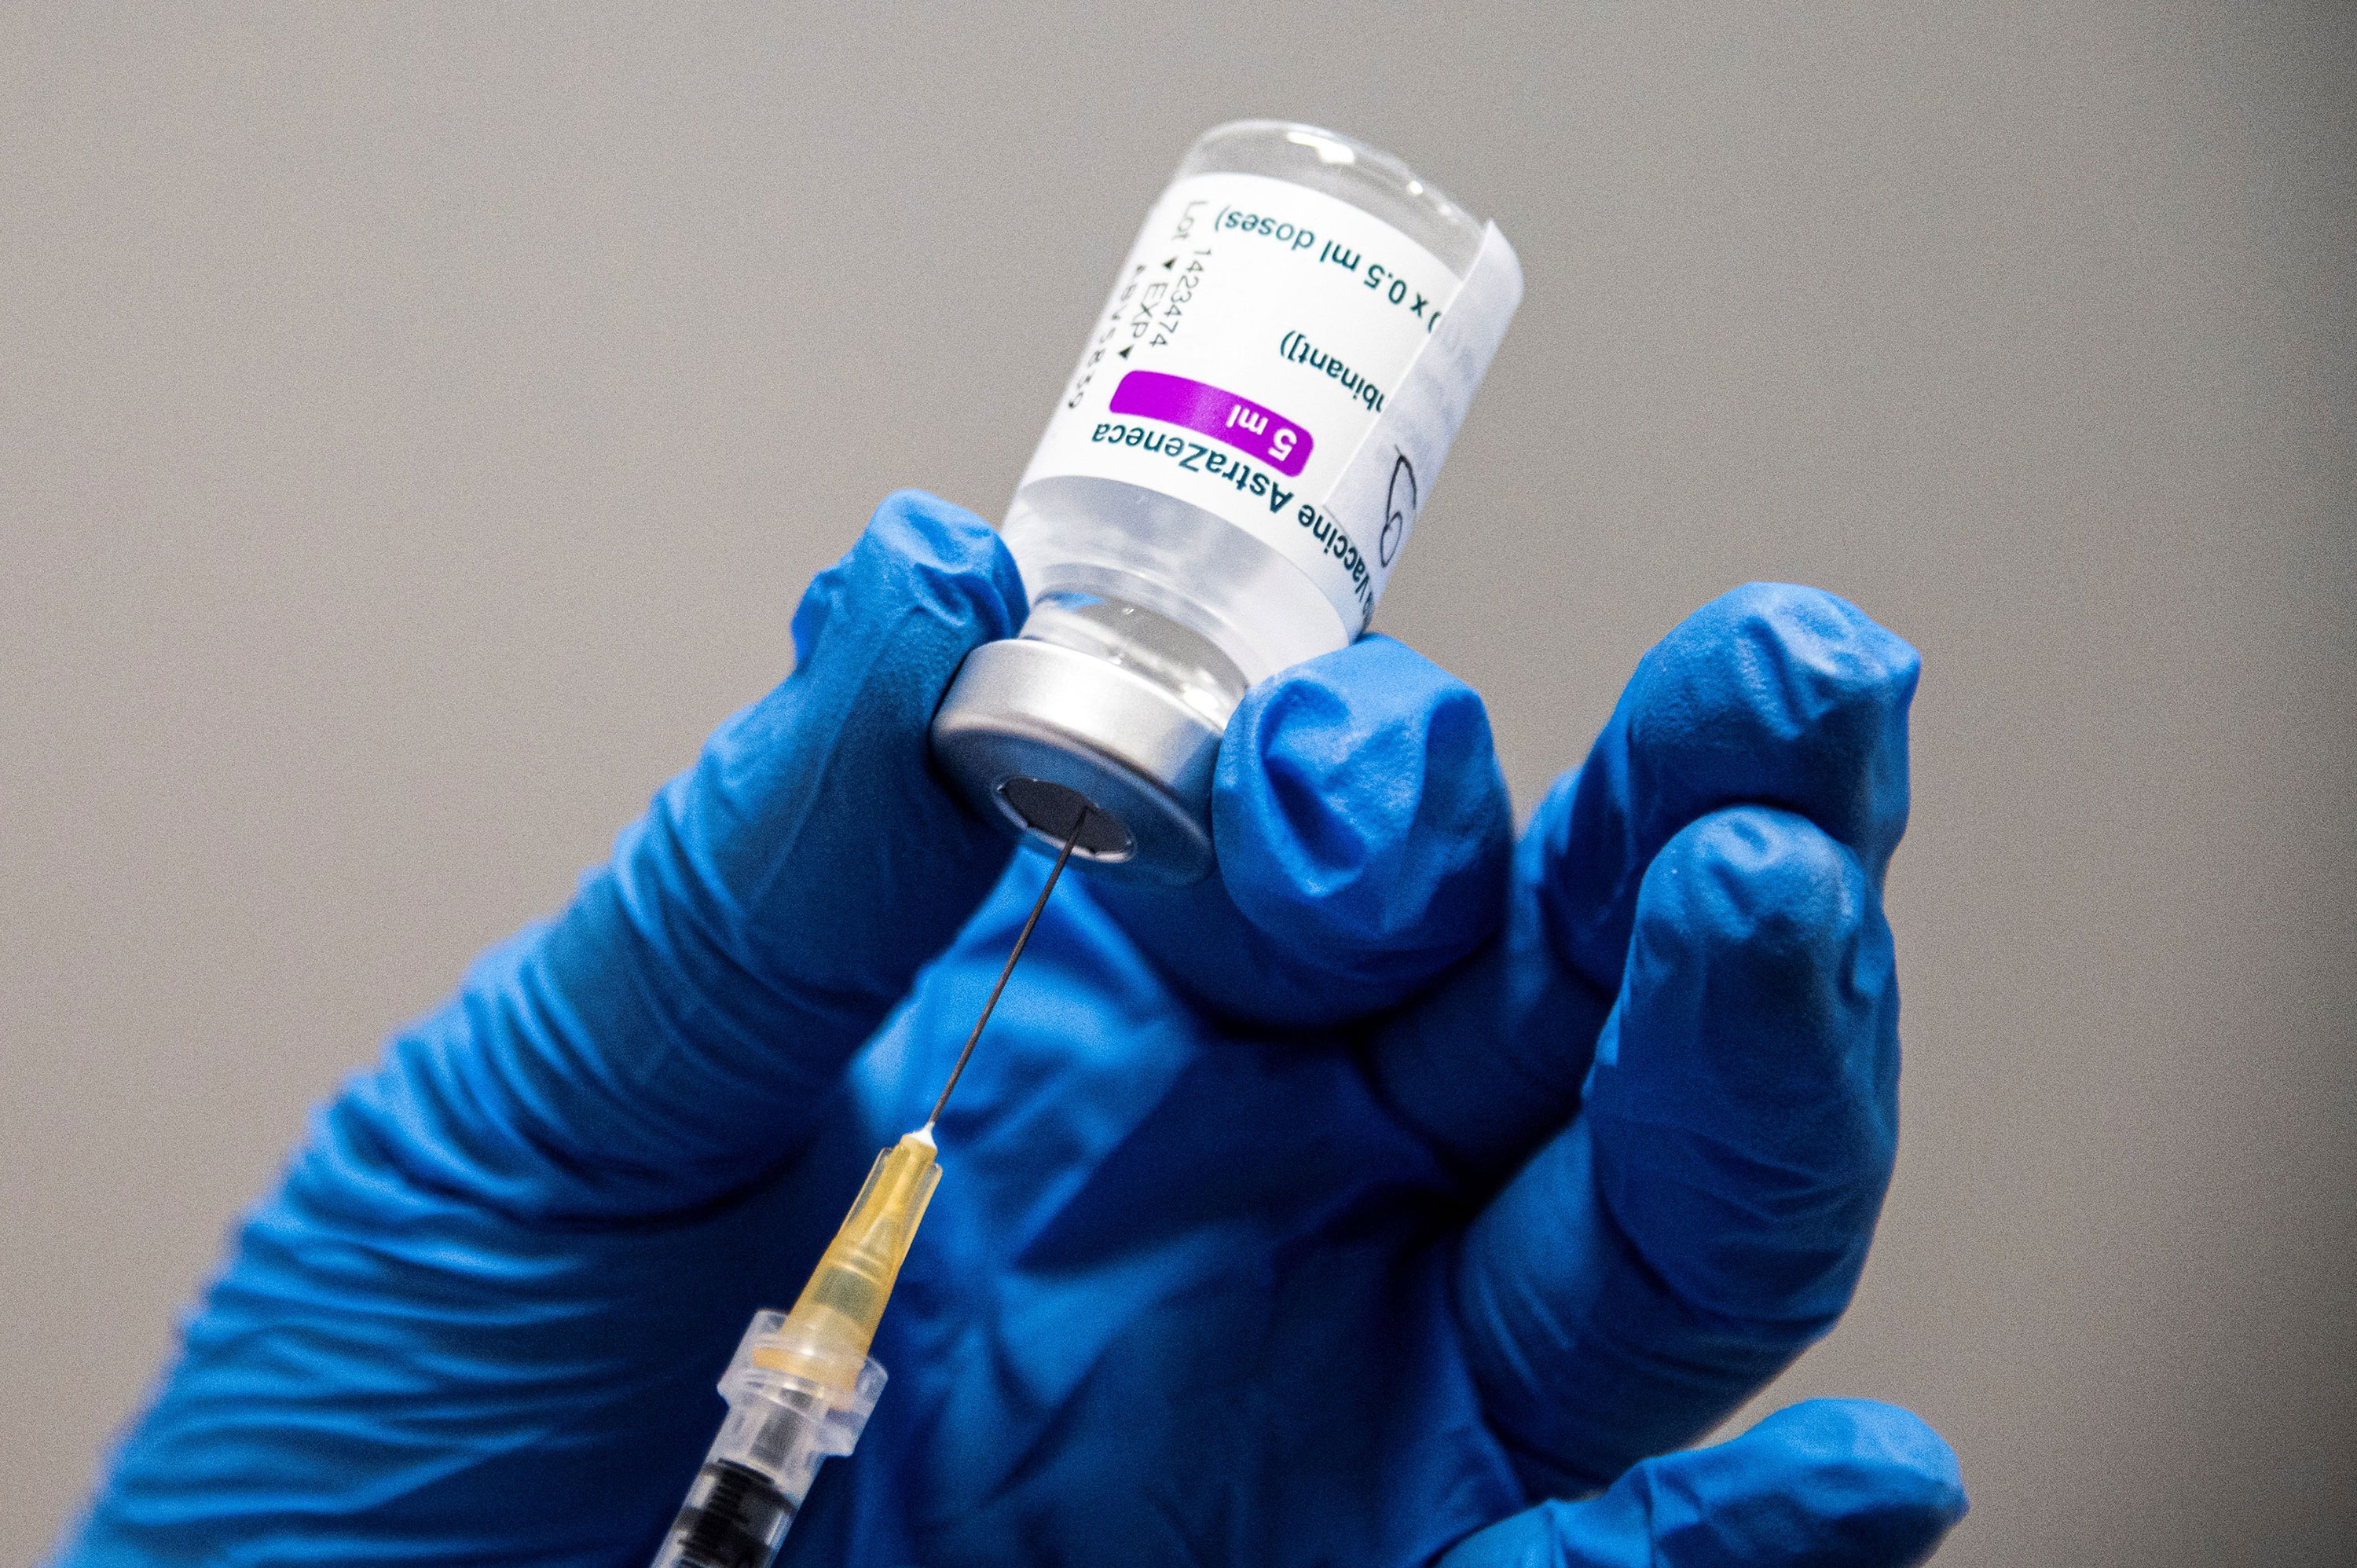 A medical worker prepares an AstraZeneca vaccine in Turin, Italy, on March 19.